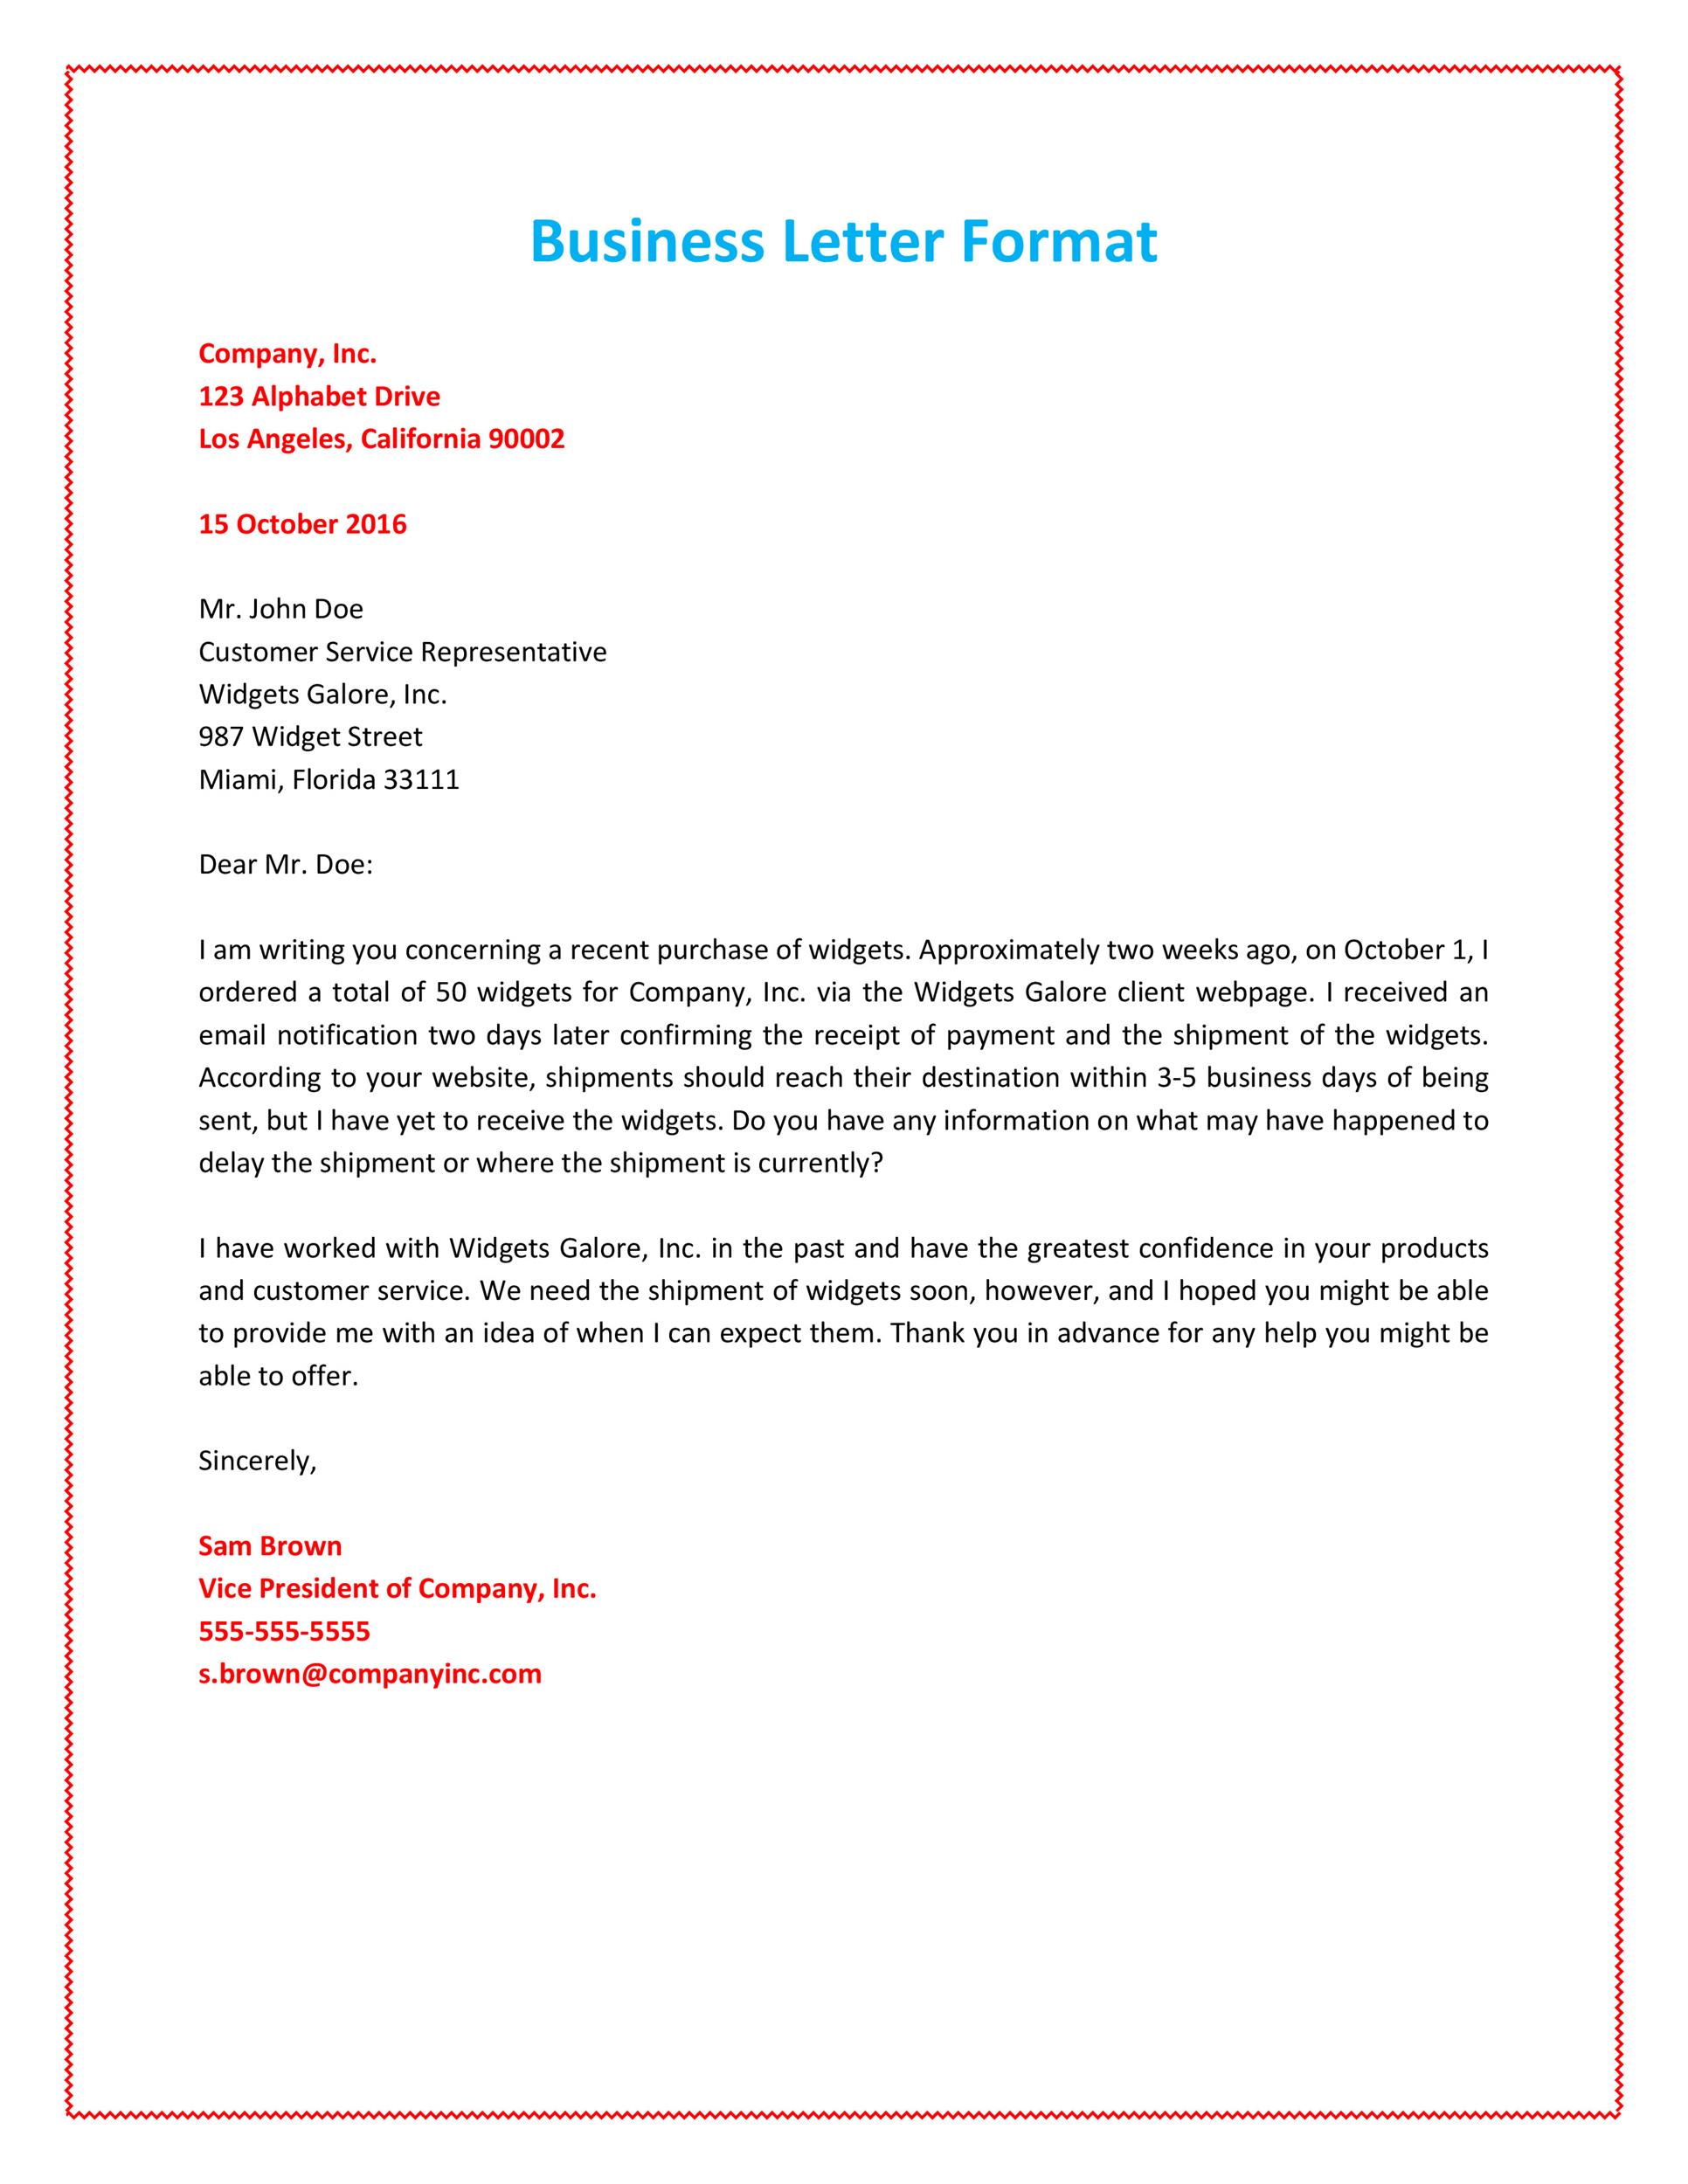 How to CC a Business Letter to Multiple Parties